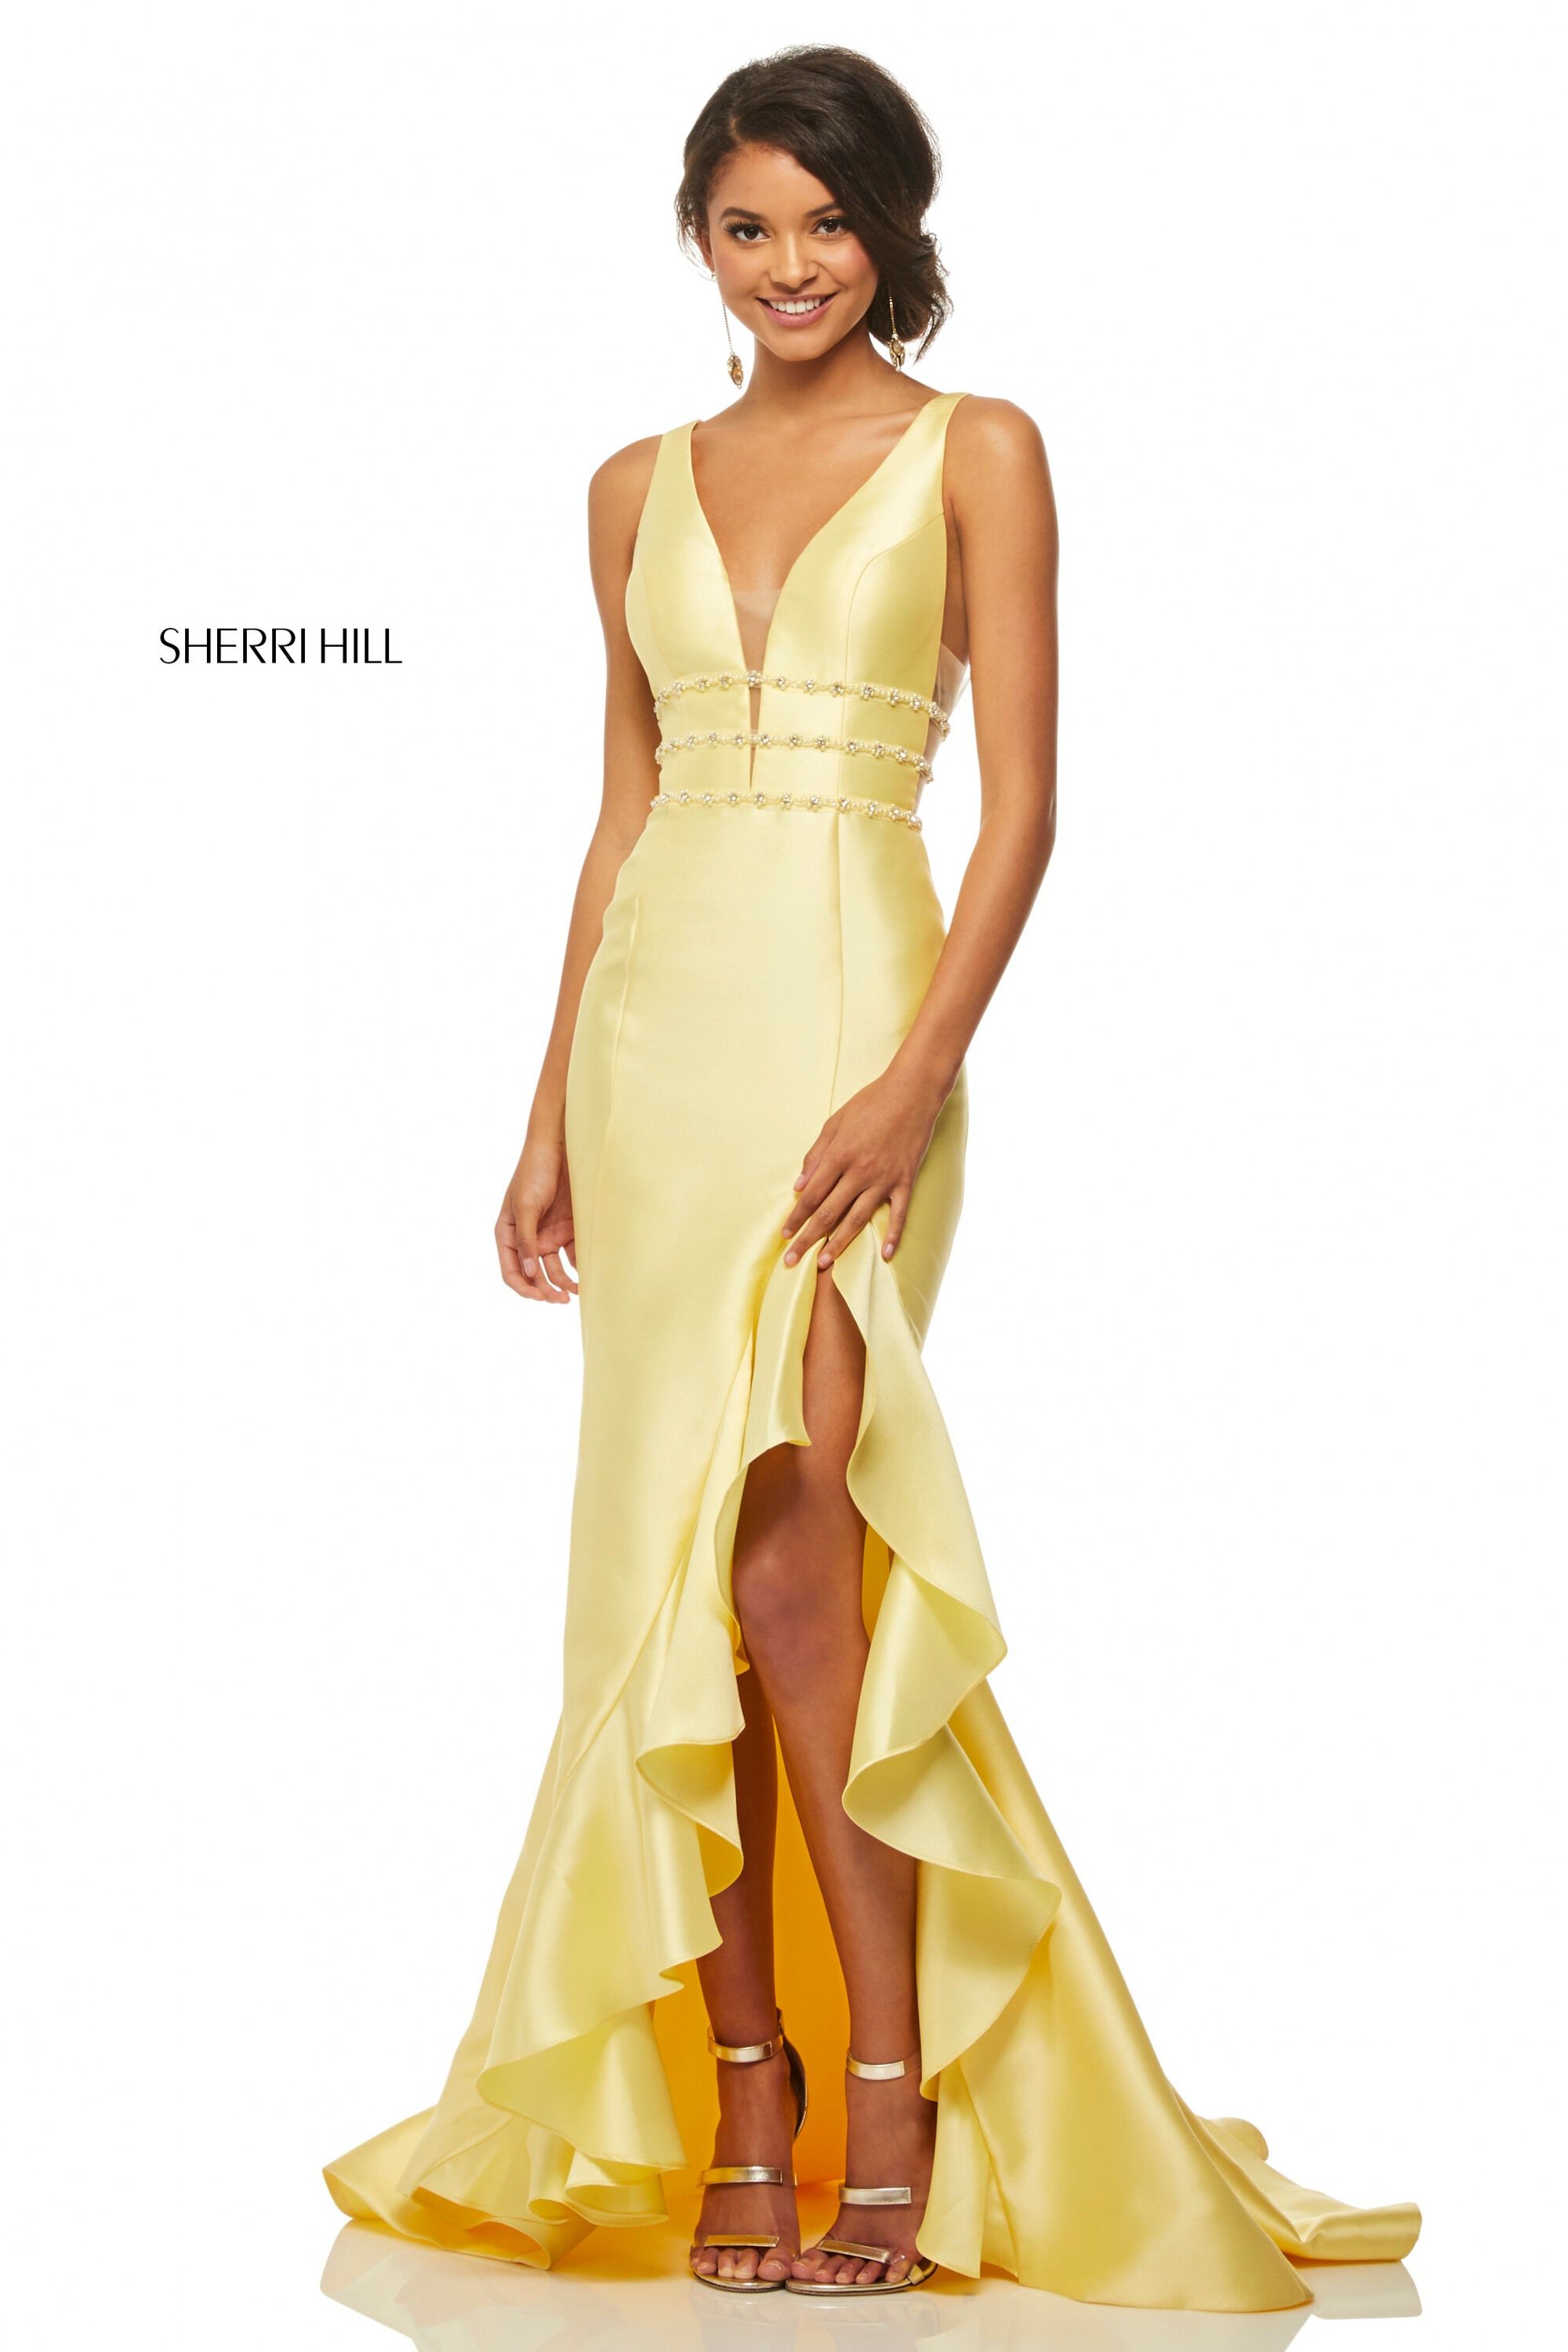 style № 52576 designed by SherriHill